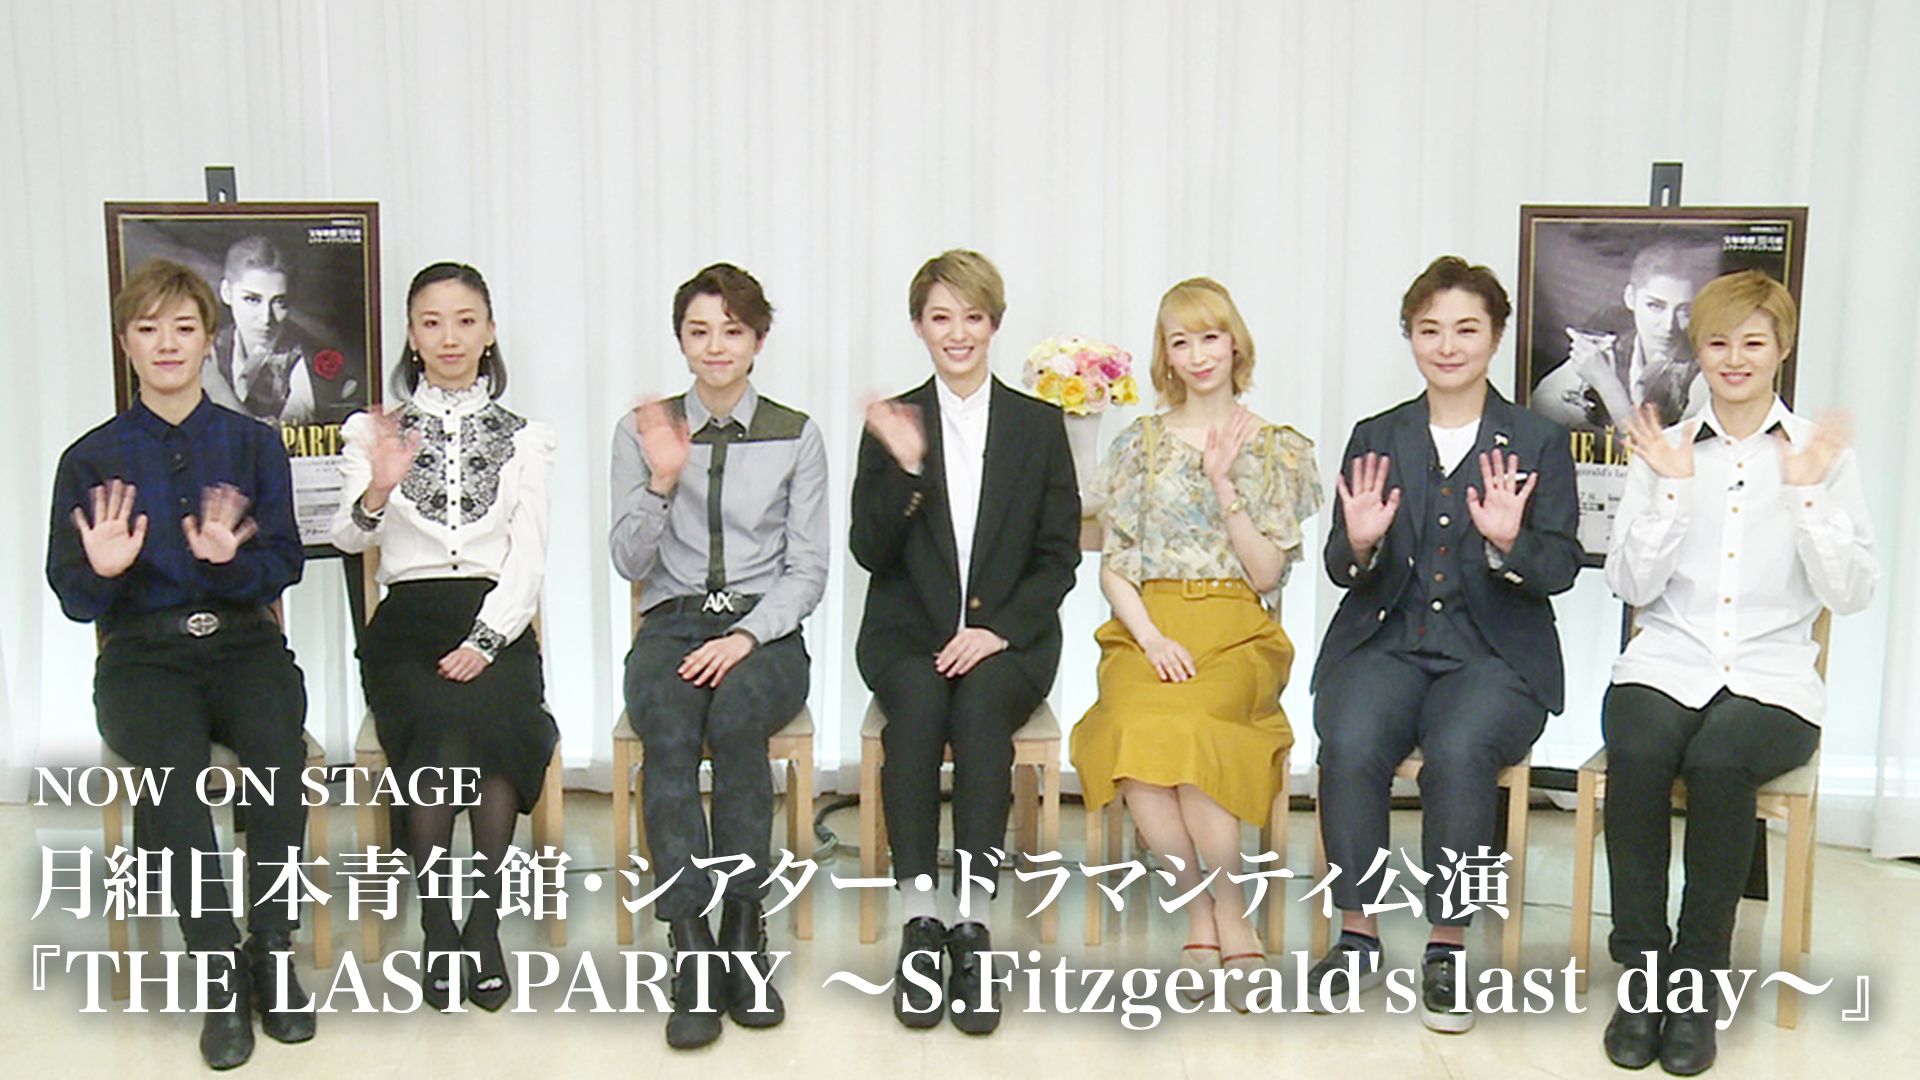 NOW ON STAGE 月組日本青年館・シアター・ドラマシティ公演『THE LAST PARTY 〜S.Fitzgerald’s last day〜』